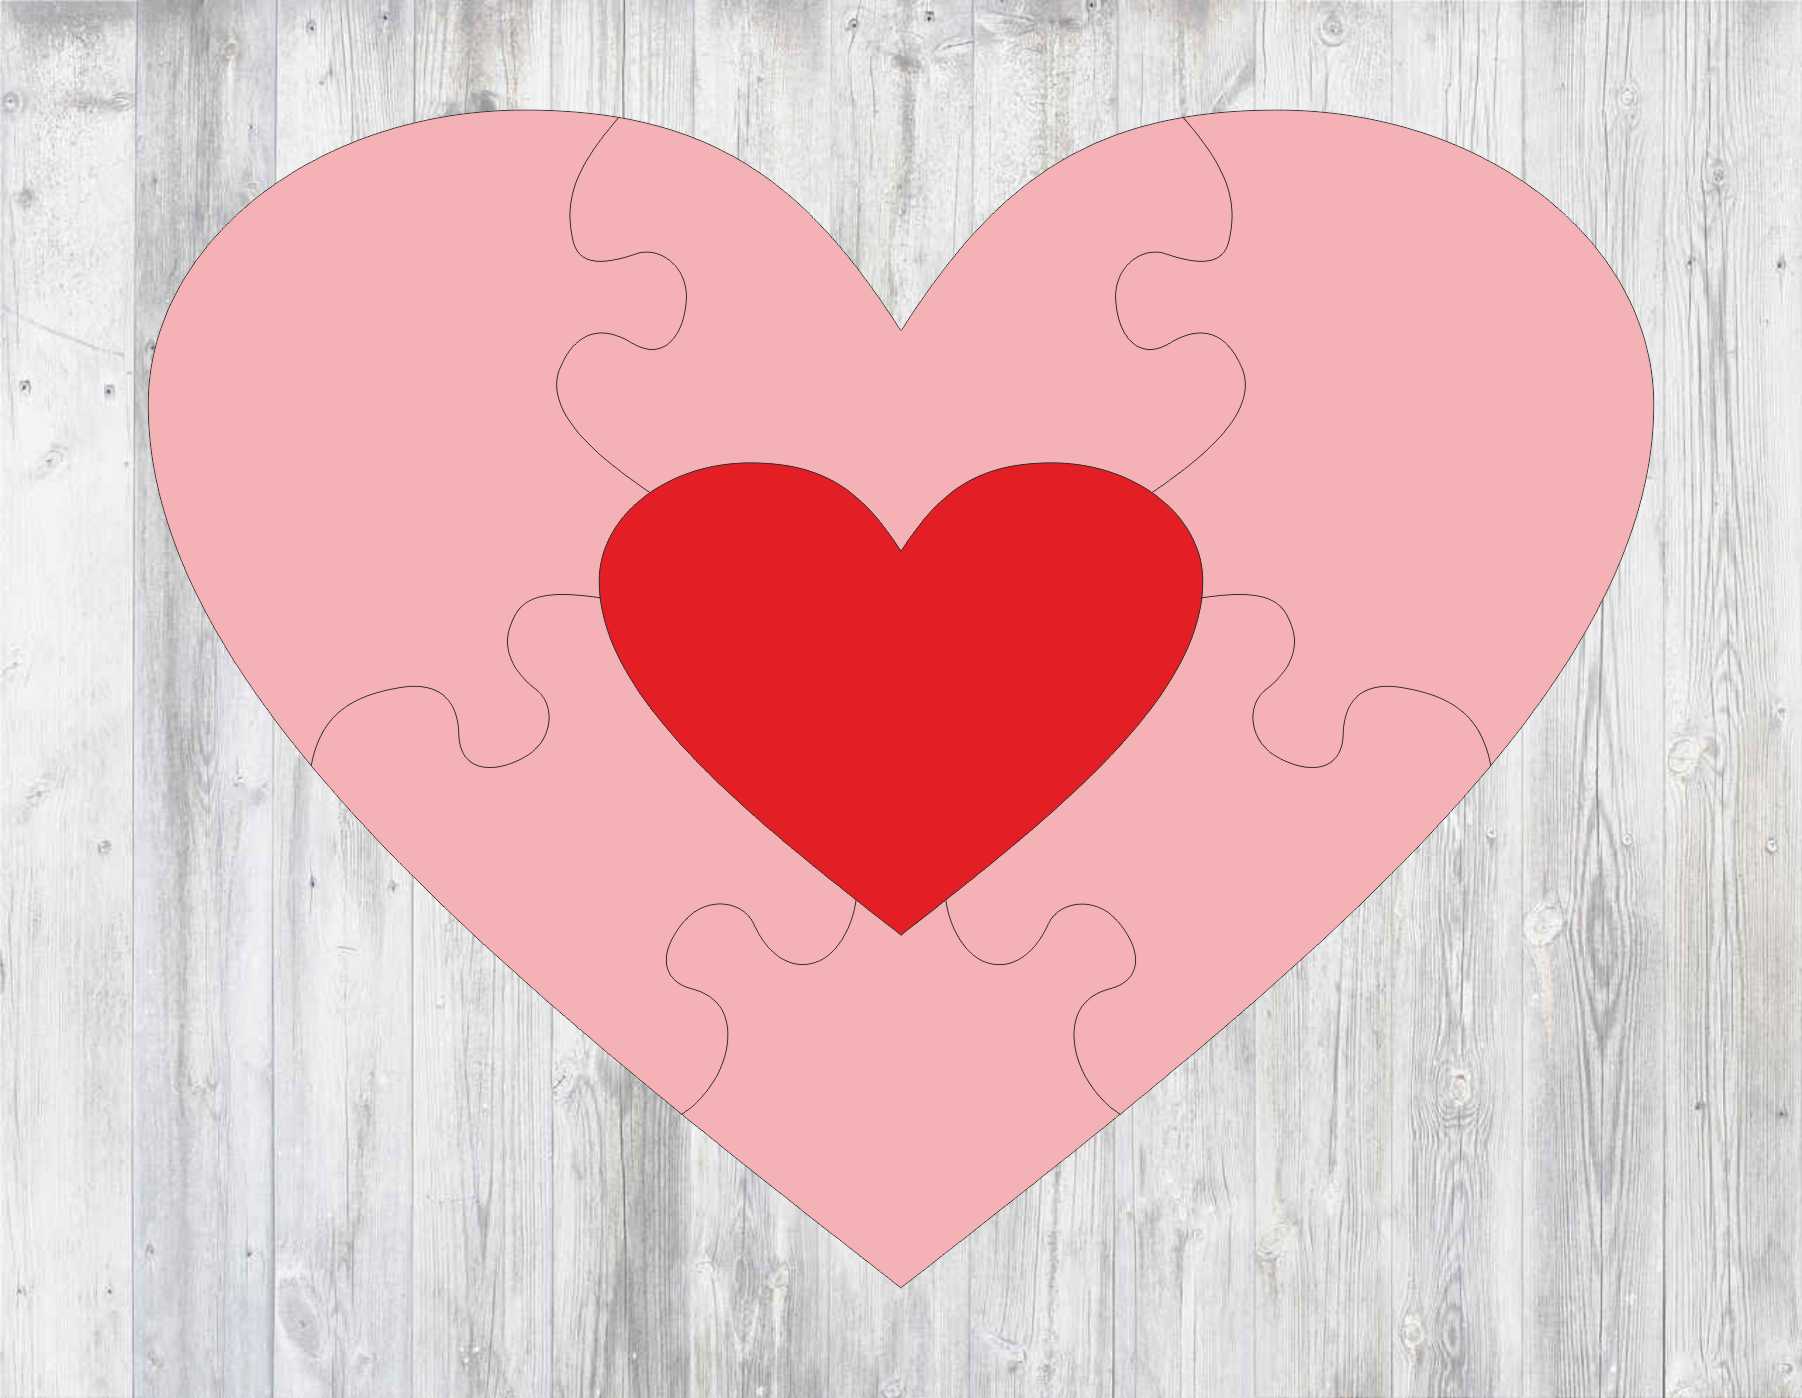 heart-puzzle-template-laser-cut-cdr-file-free-download-vectors-file